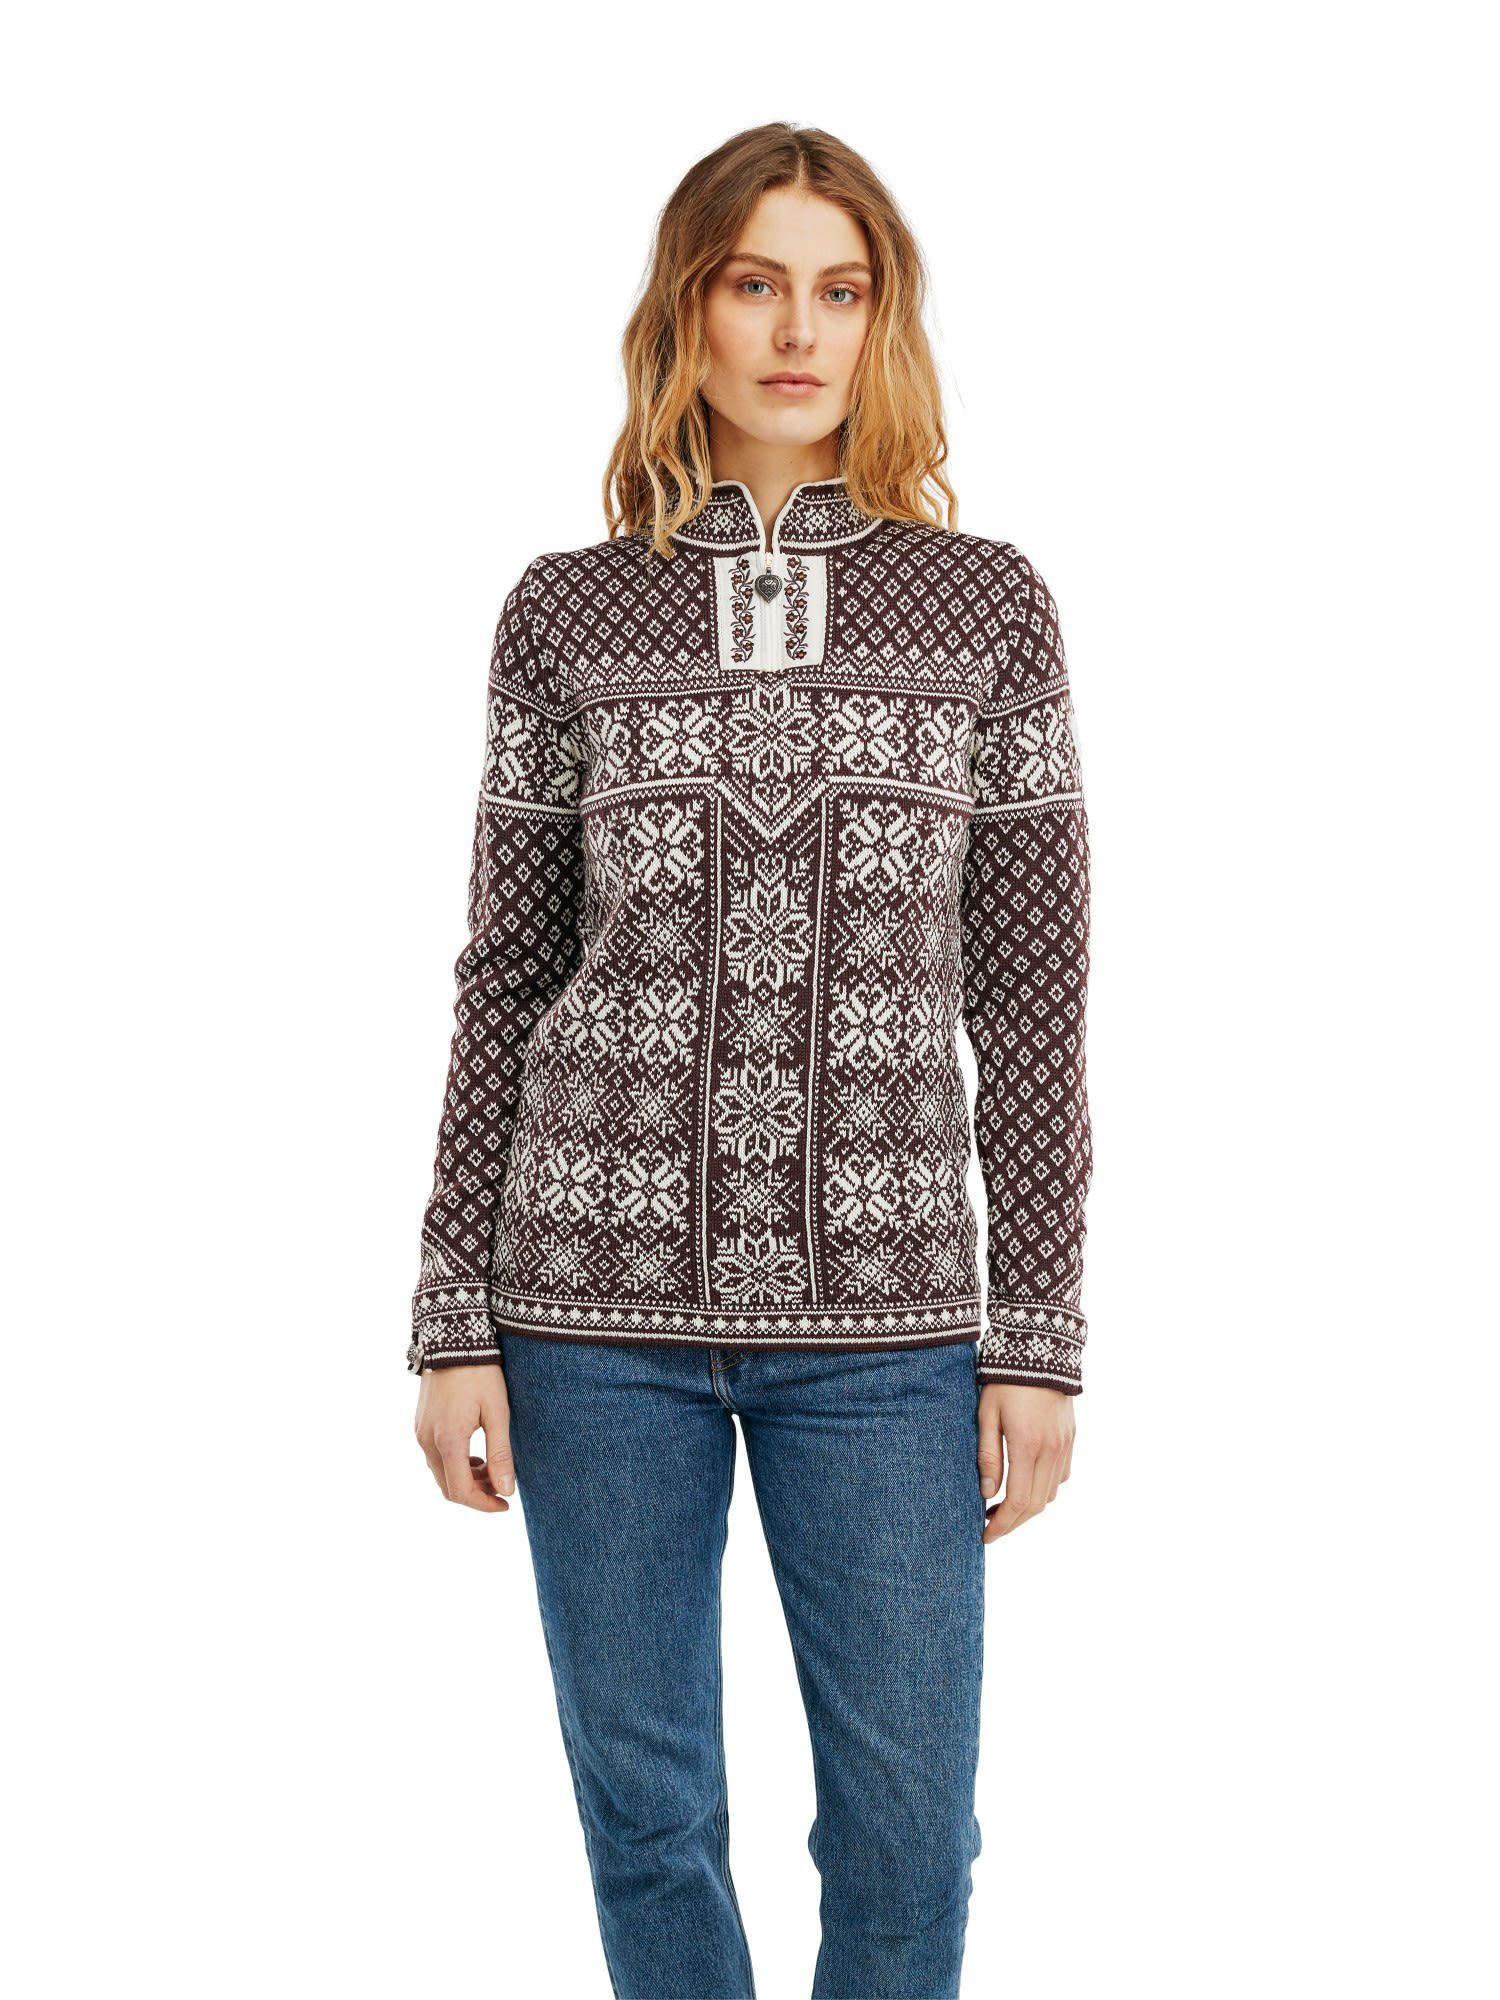 Dale of Norway W - Offwhite Sweater Damen Dale Peace Aubergine Longpullover Of Norway